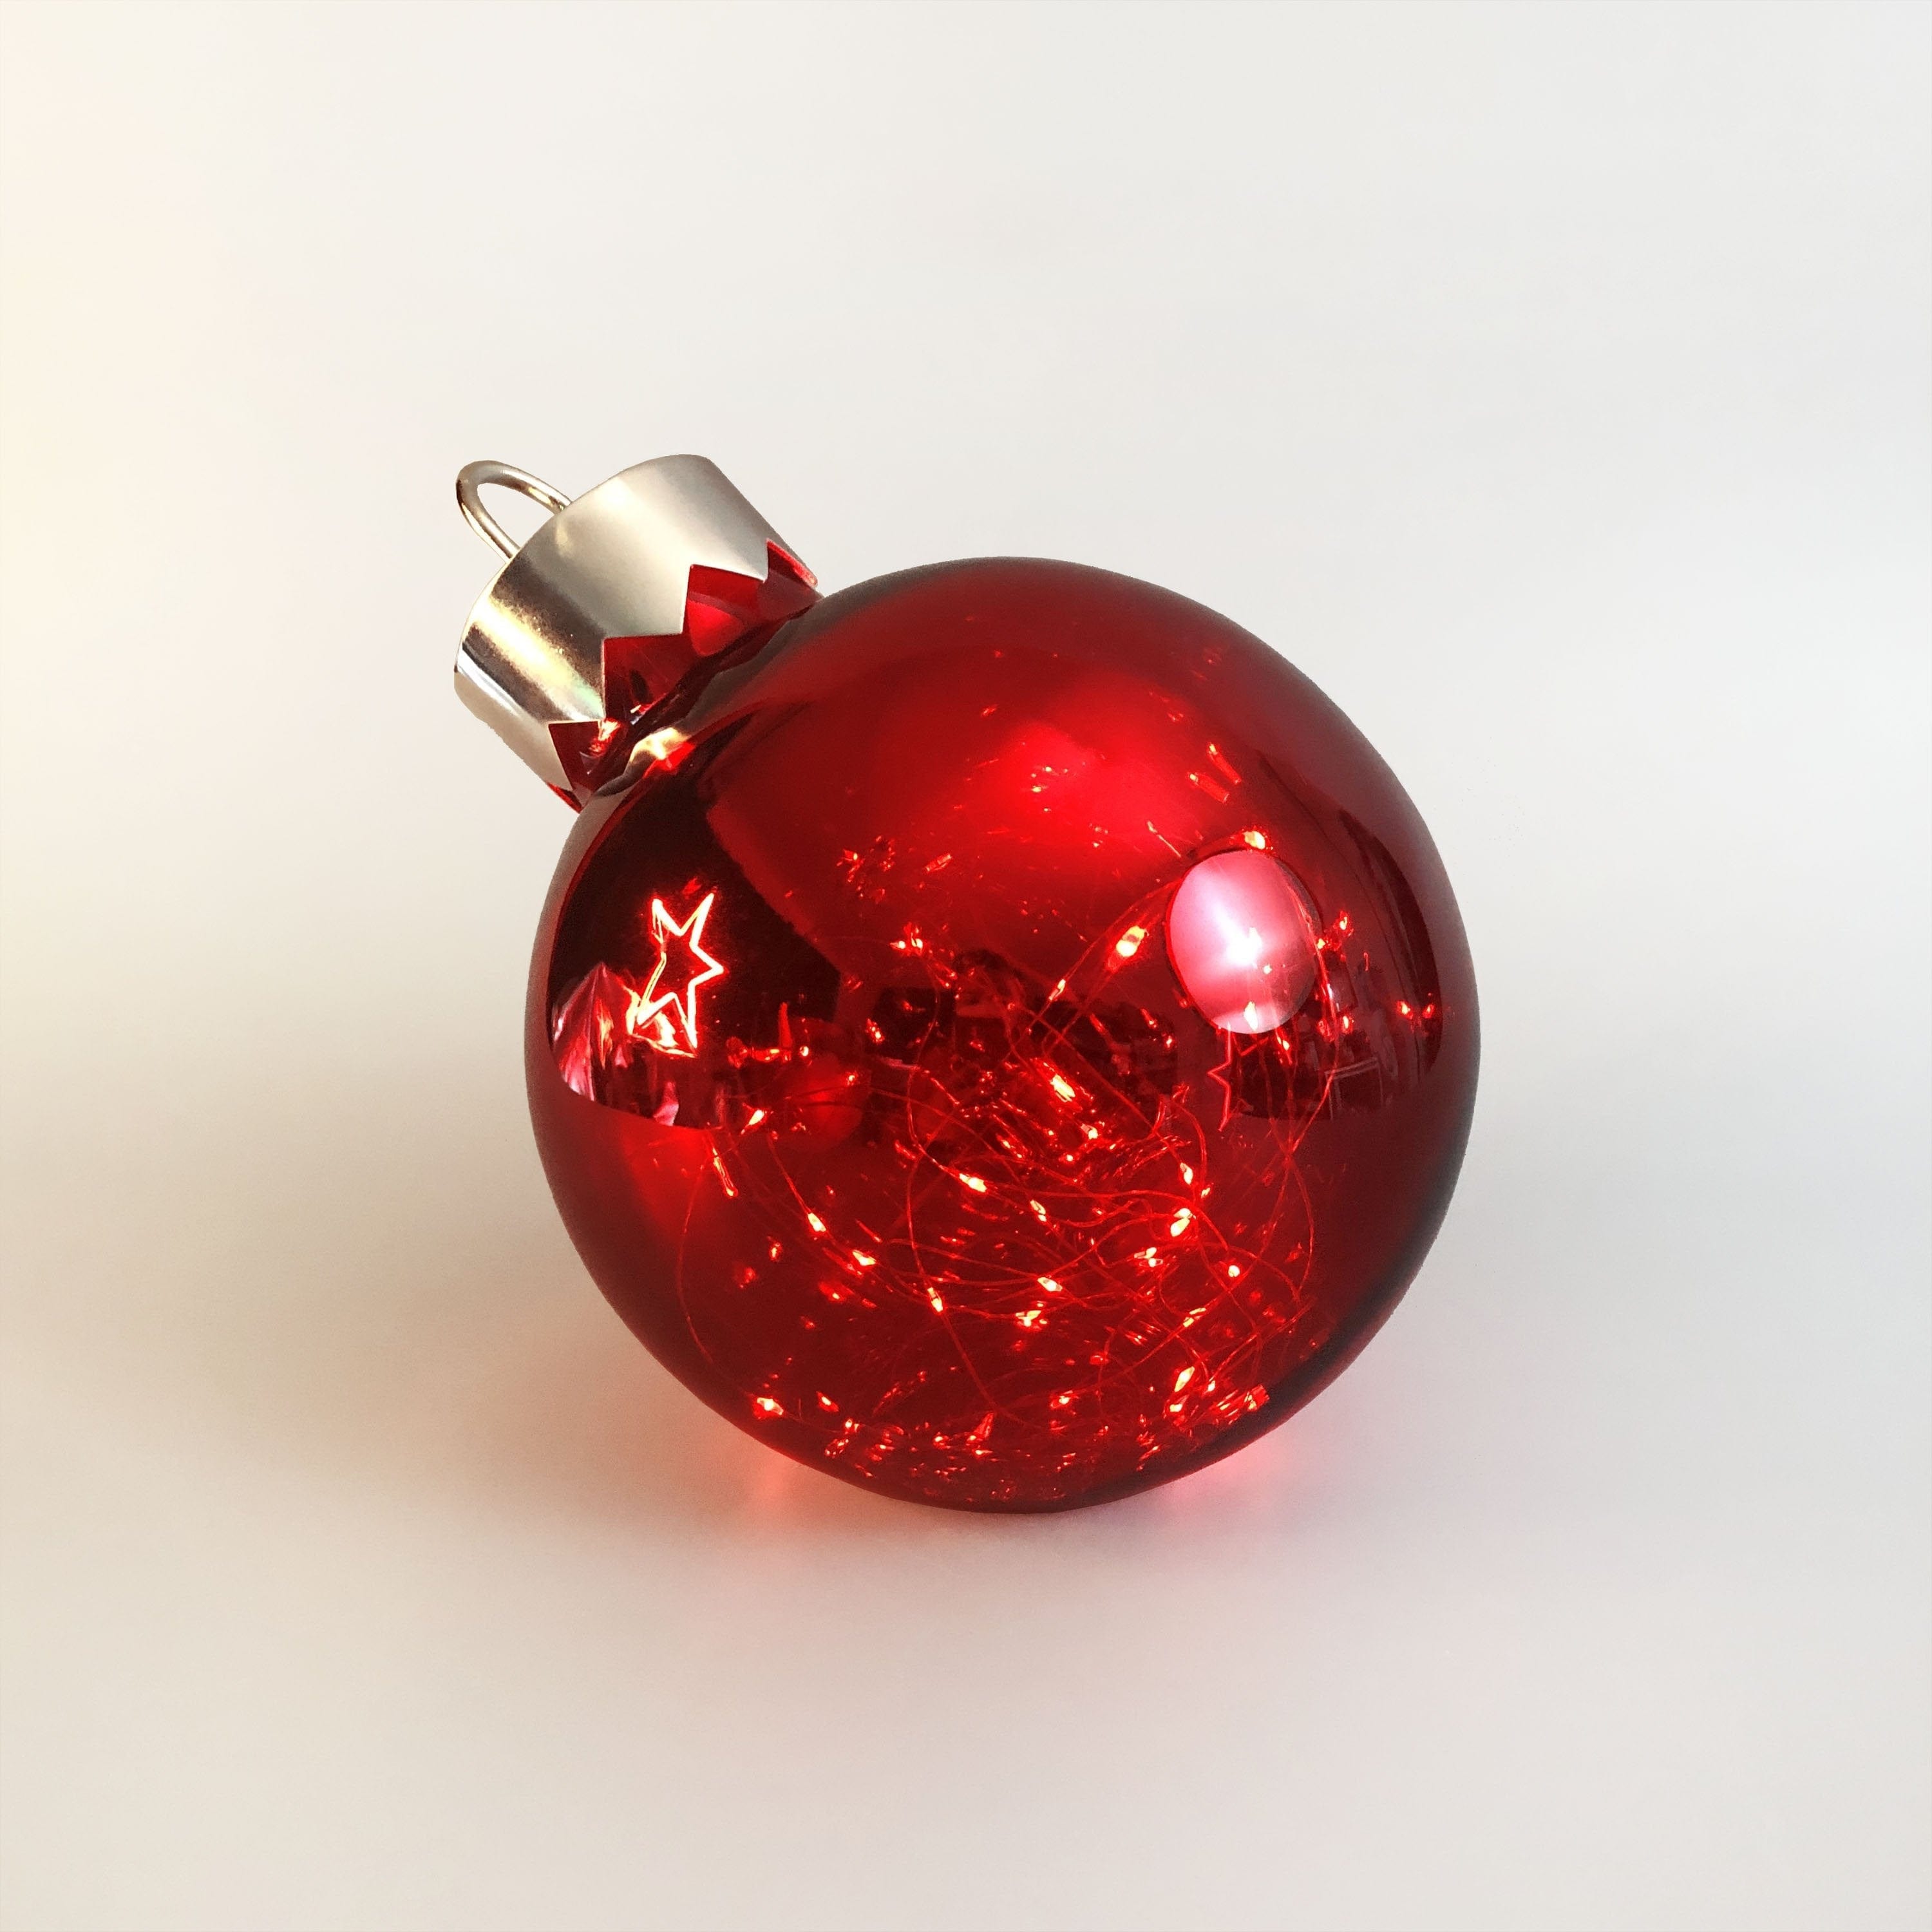 Promo Christmas Table Decoration&Candle Red Illuminated Christmas Glass Bauble - 5 colour options DEC003R-P